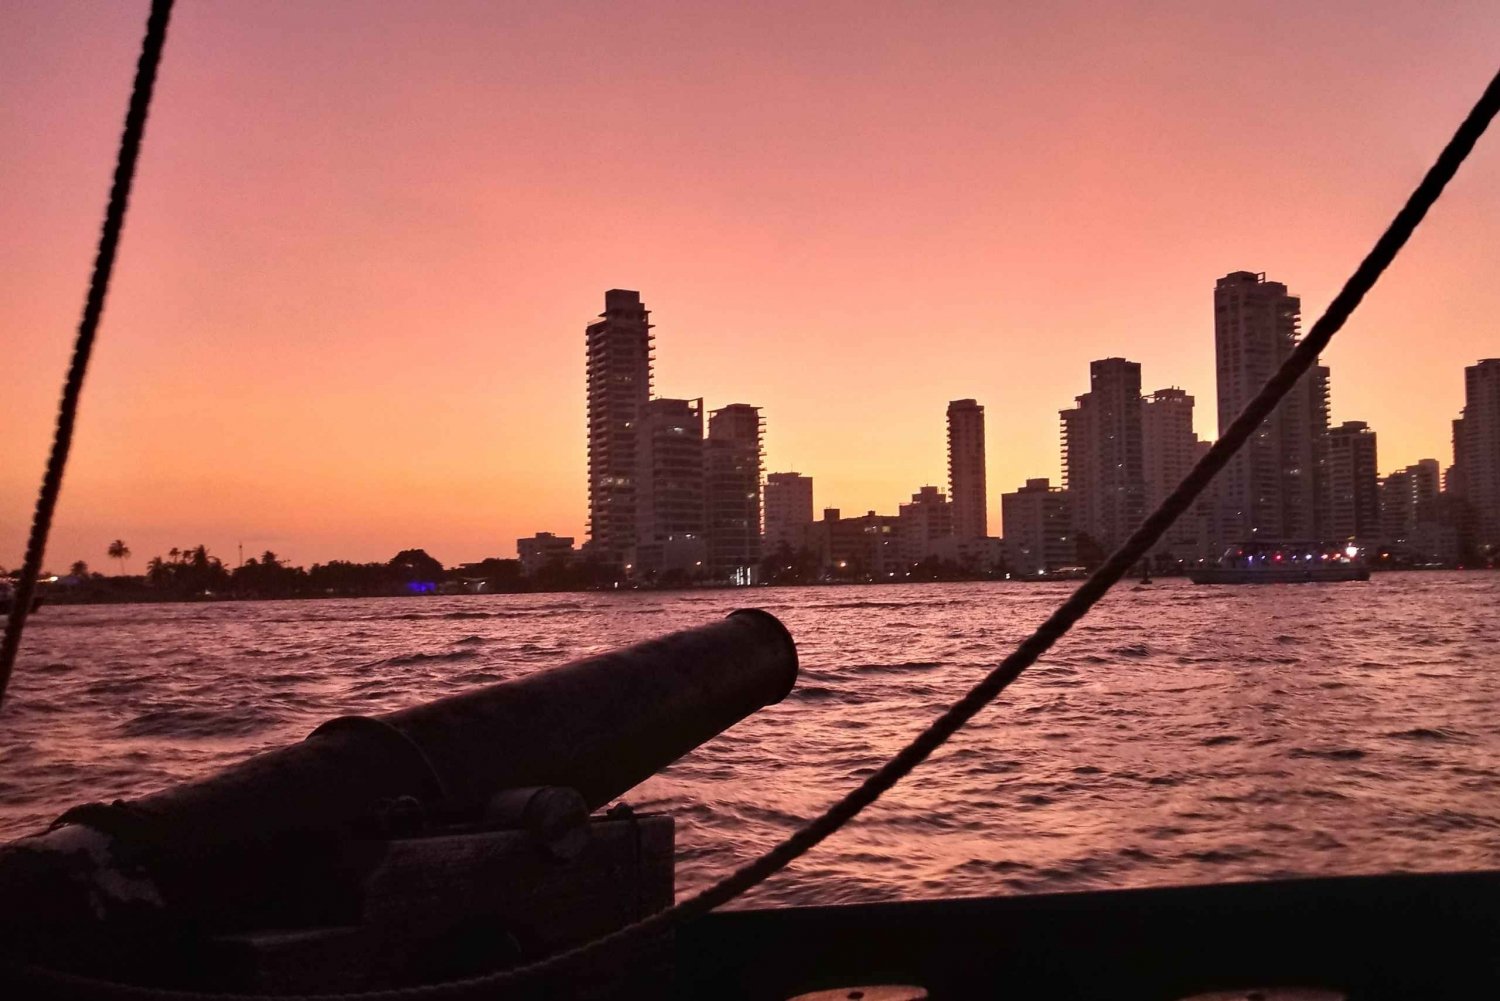 Cartagena: Sunset Cruise with Open Bar on a Pirate Ship